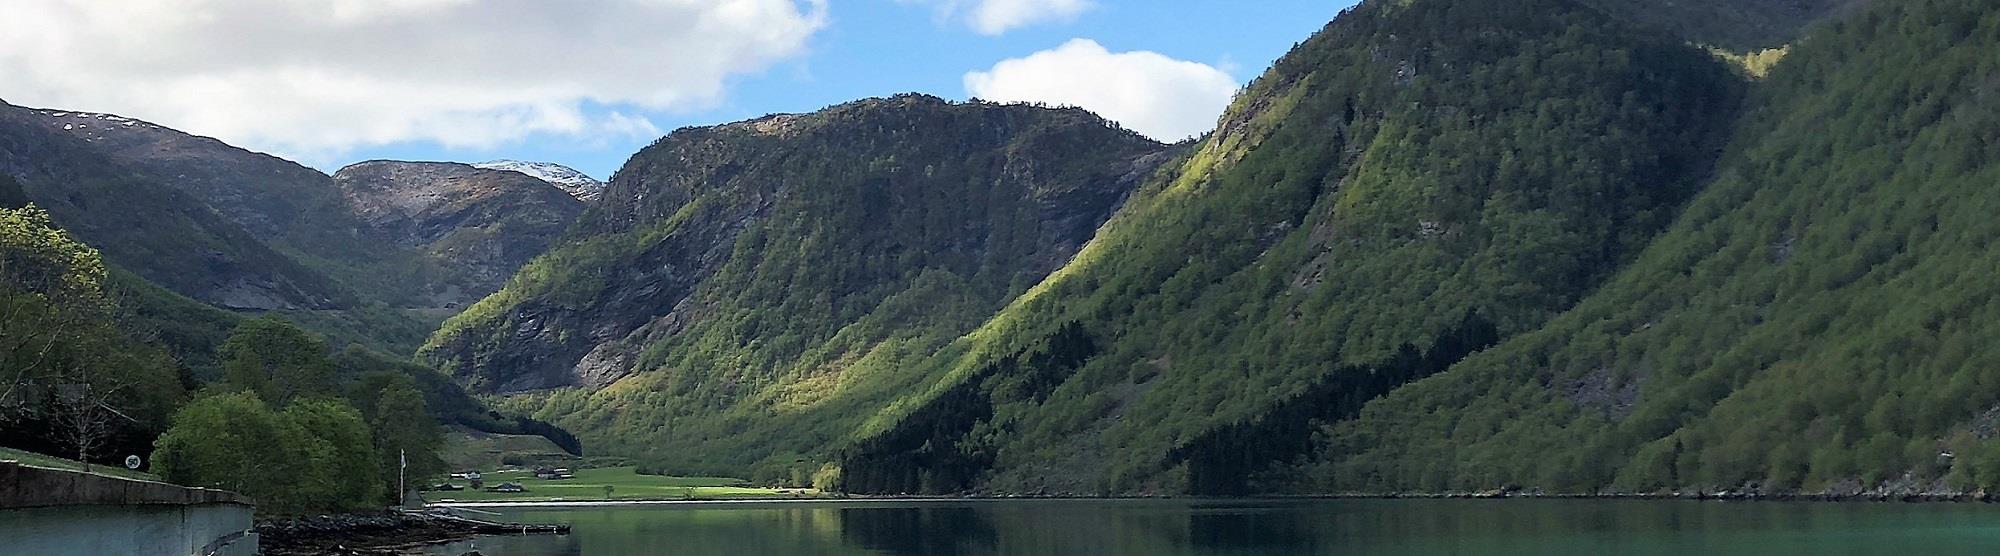 The fjord – off the beaten track